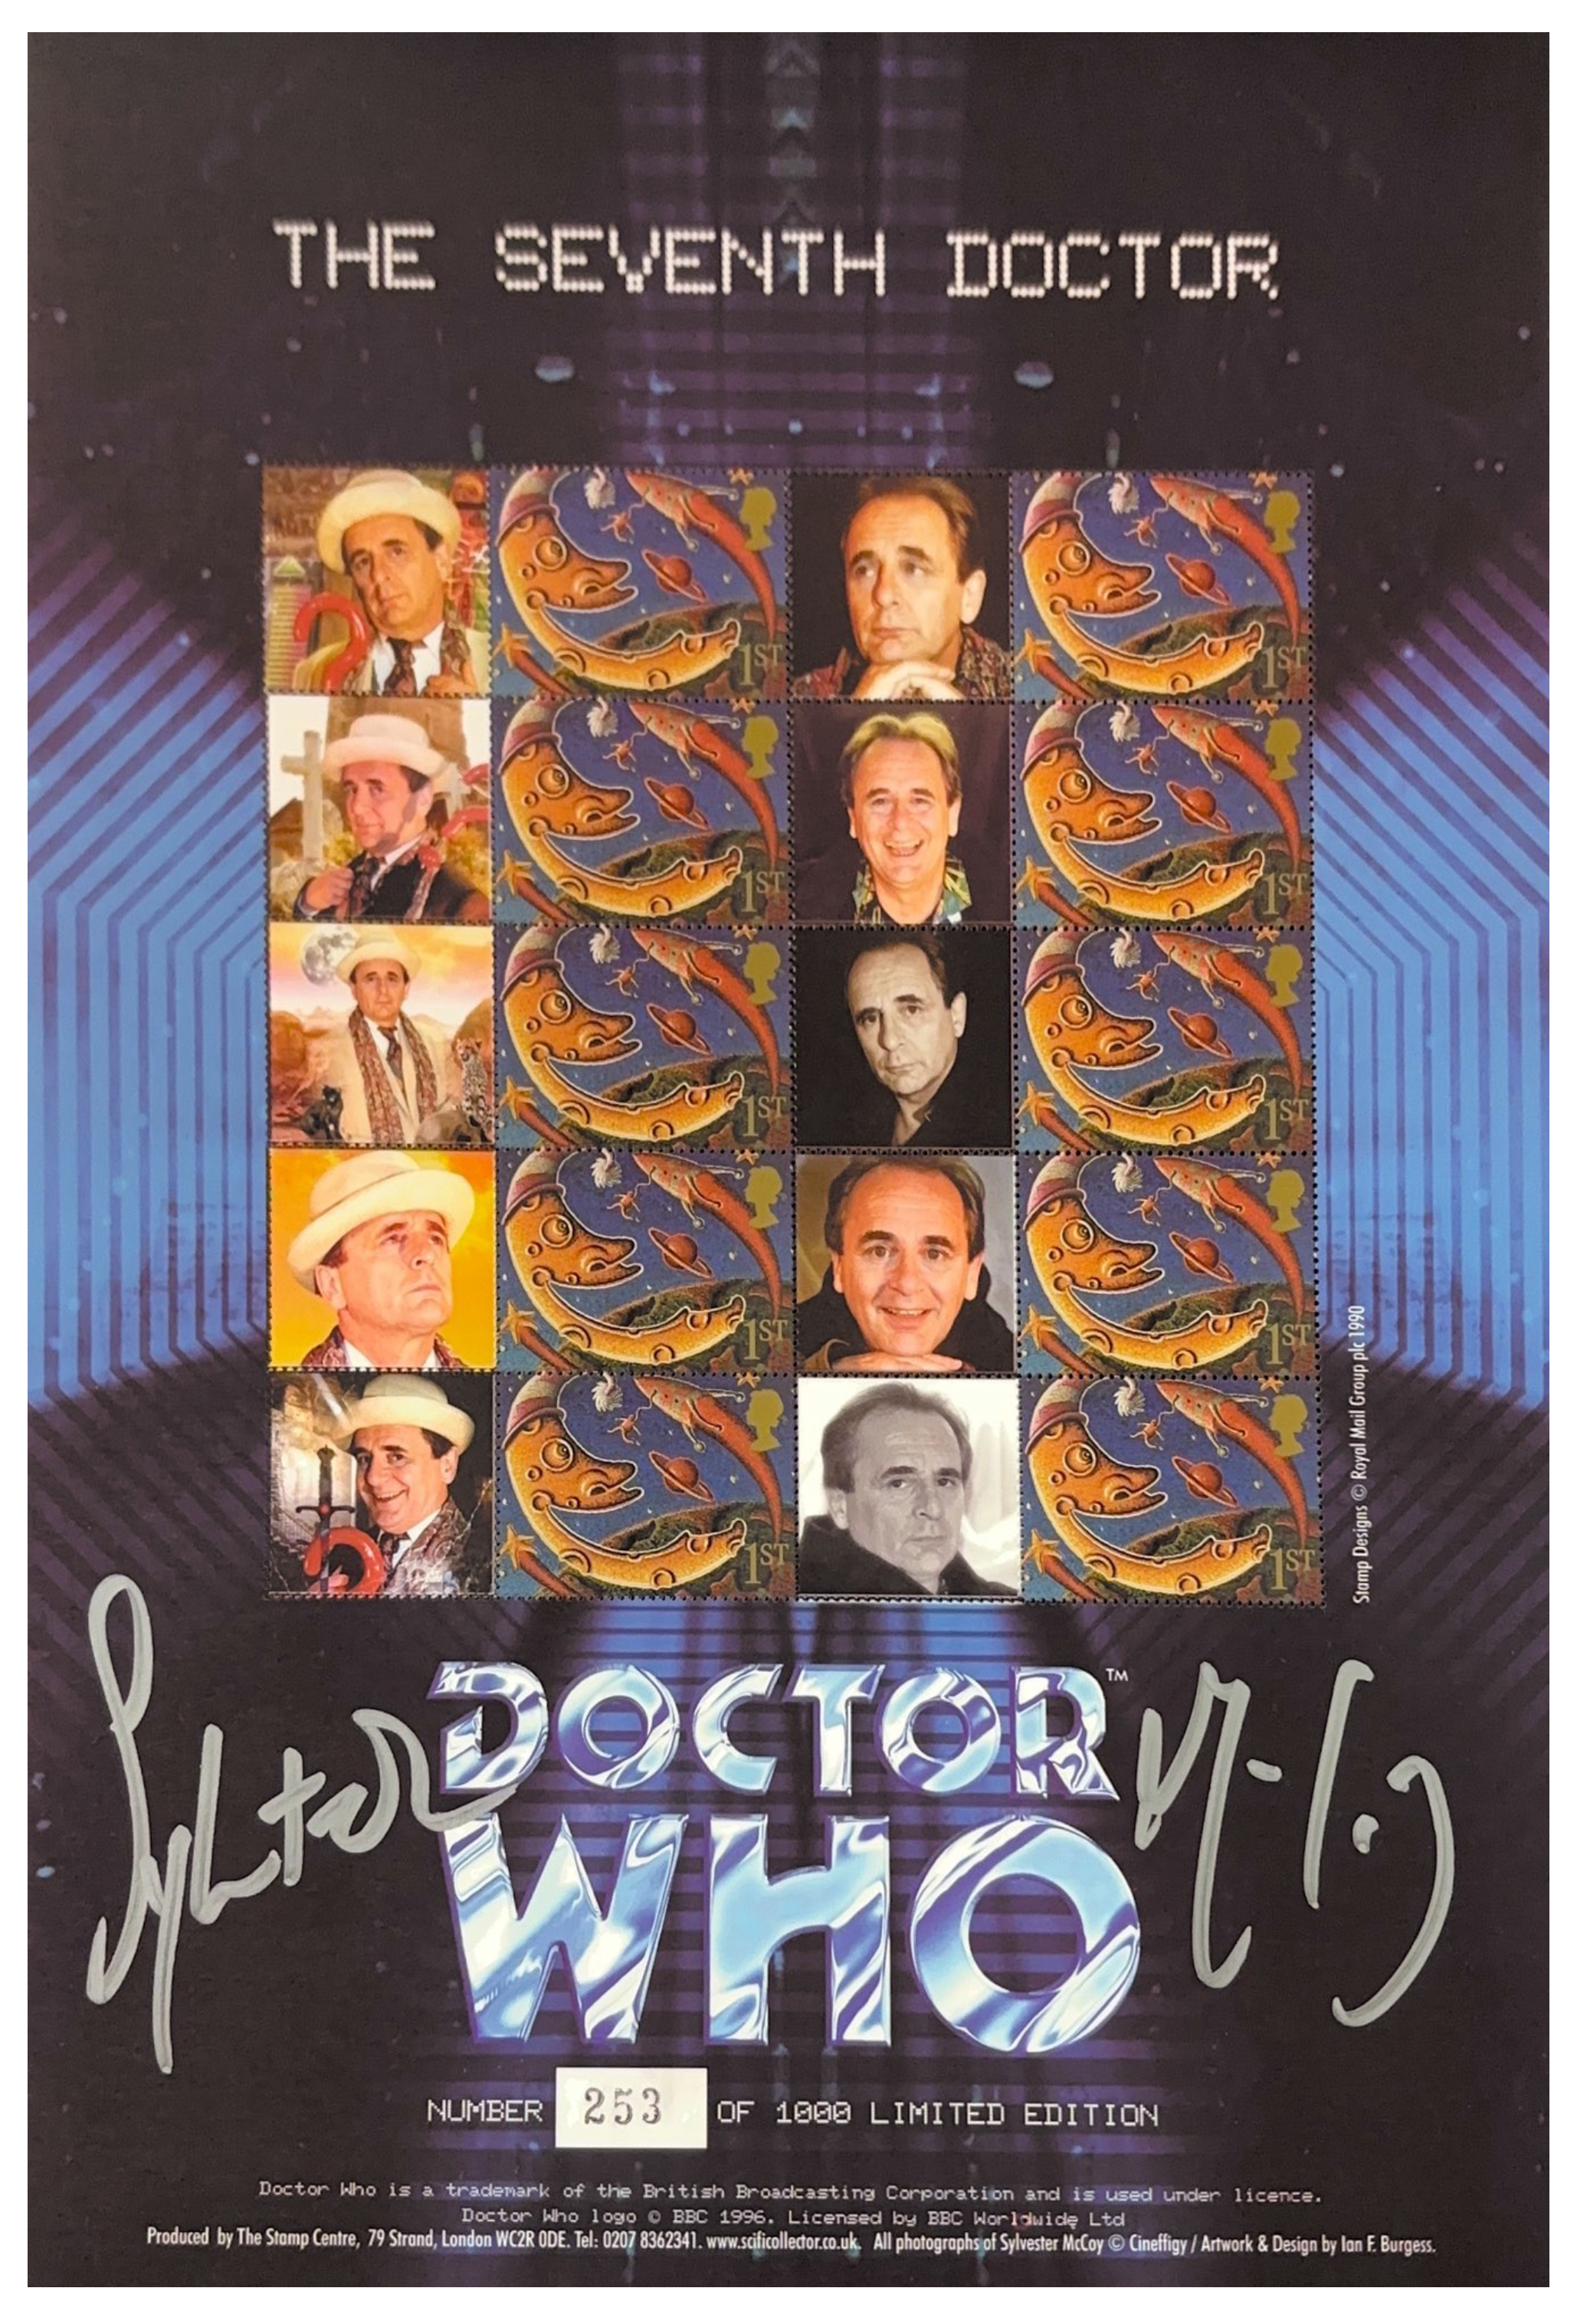 The 7th Doctor Who Stamp Sheet Limited Edition Signed by Sylvester McCoy